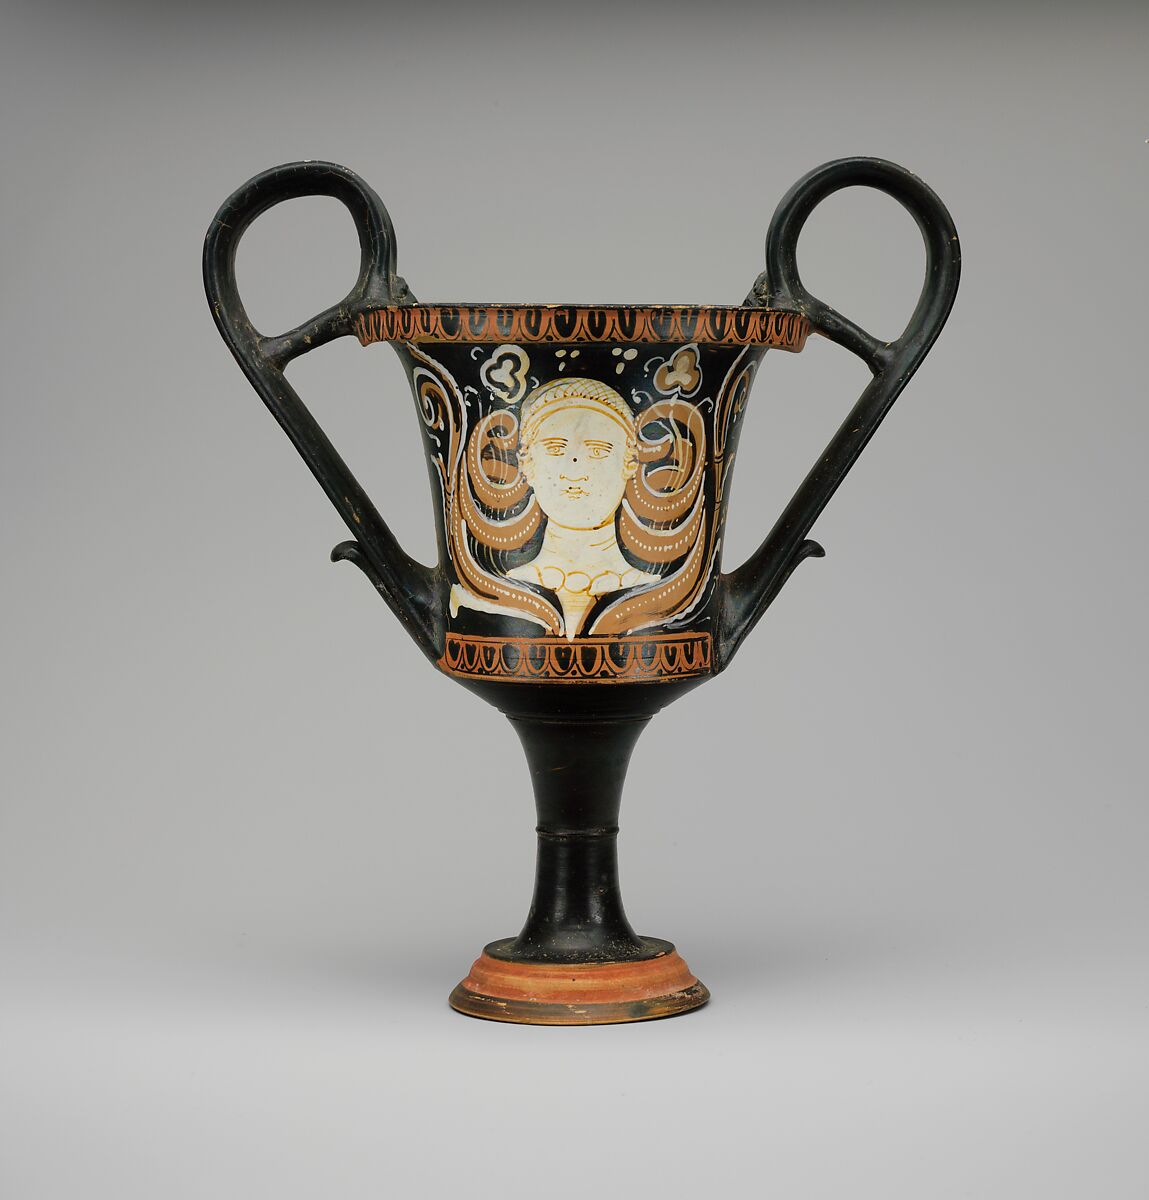 Terracotta kantharos (drinking cup with high handles), Attributed to the Painter of Bari 5981, Terracotta, Greek, South Italian, Apulian 